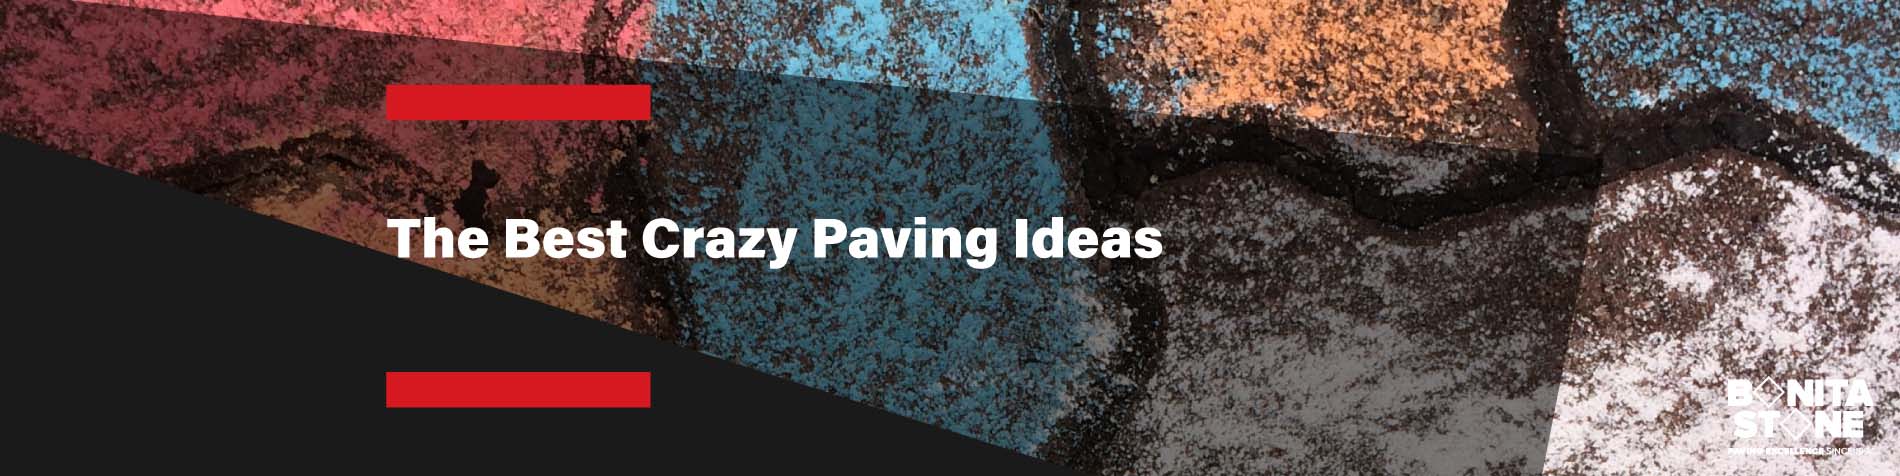 the-best-crazy-paving-ideas-banner